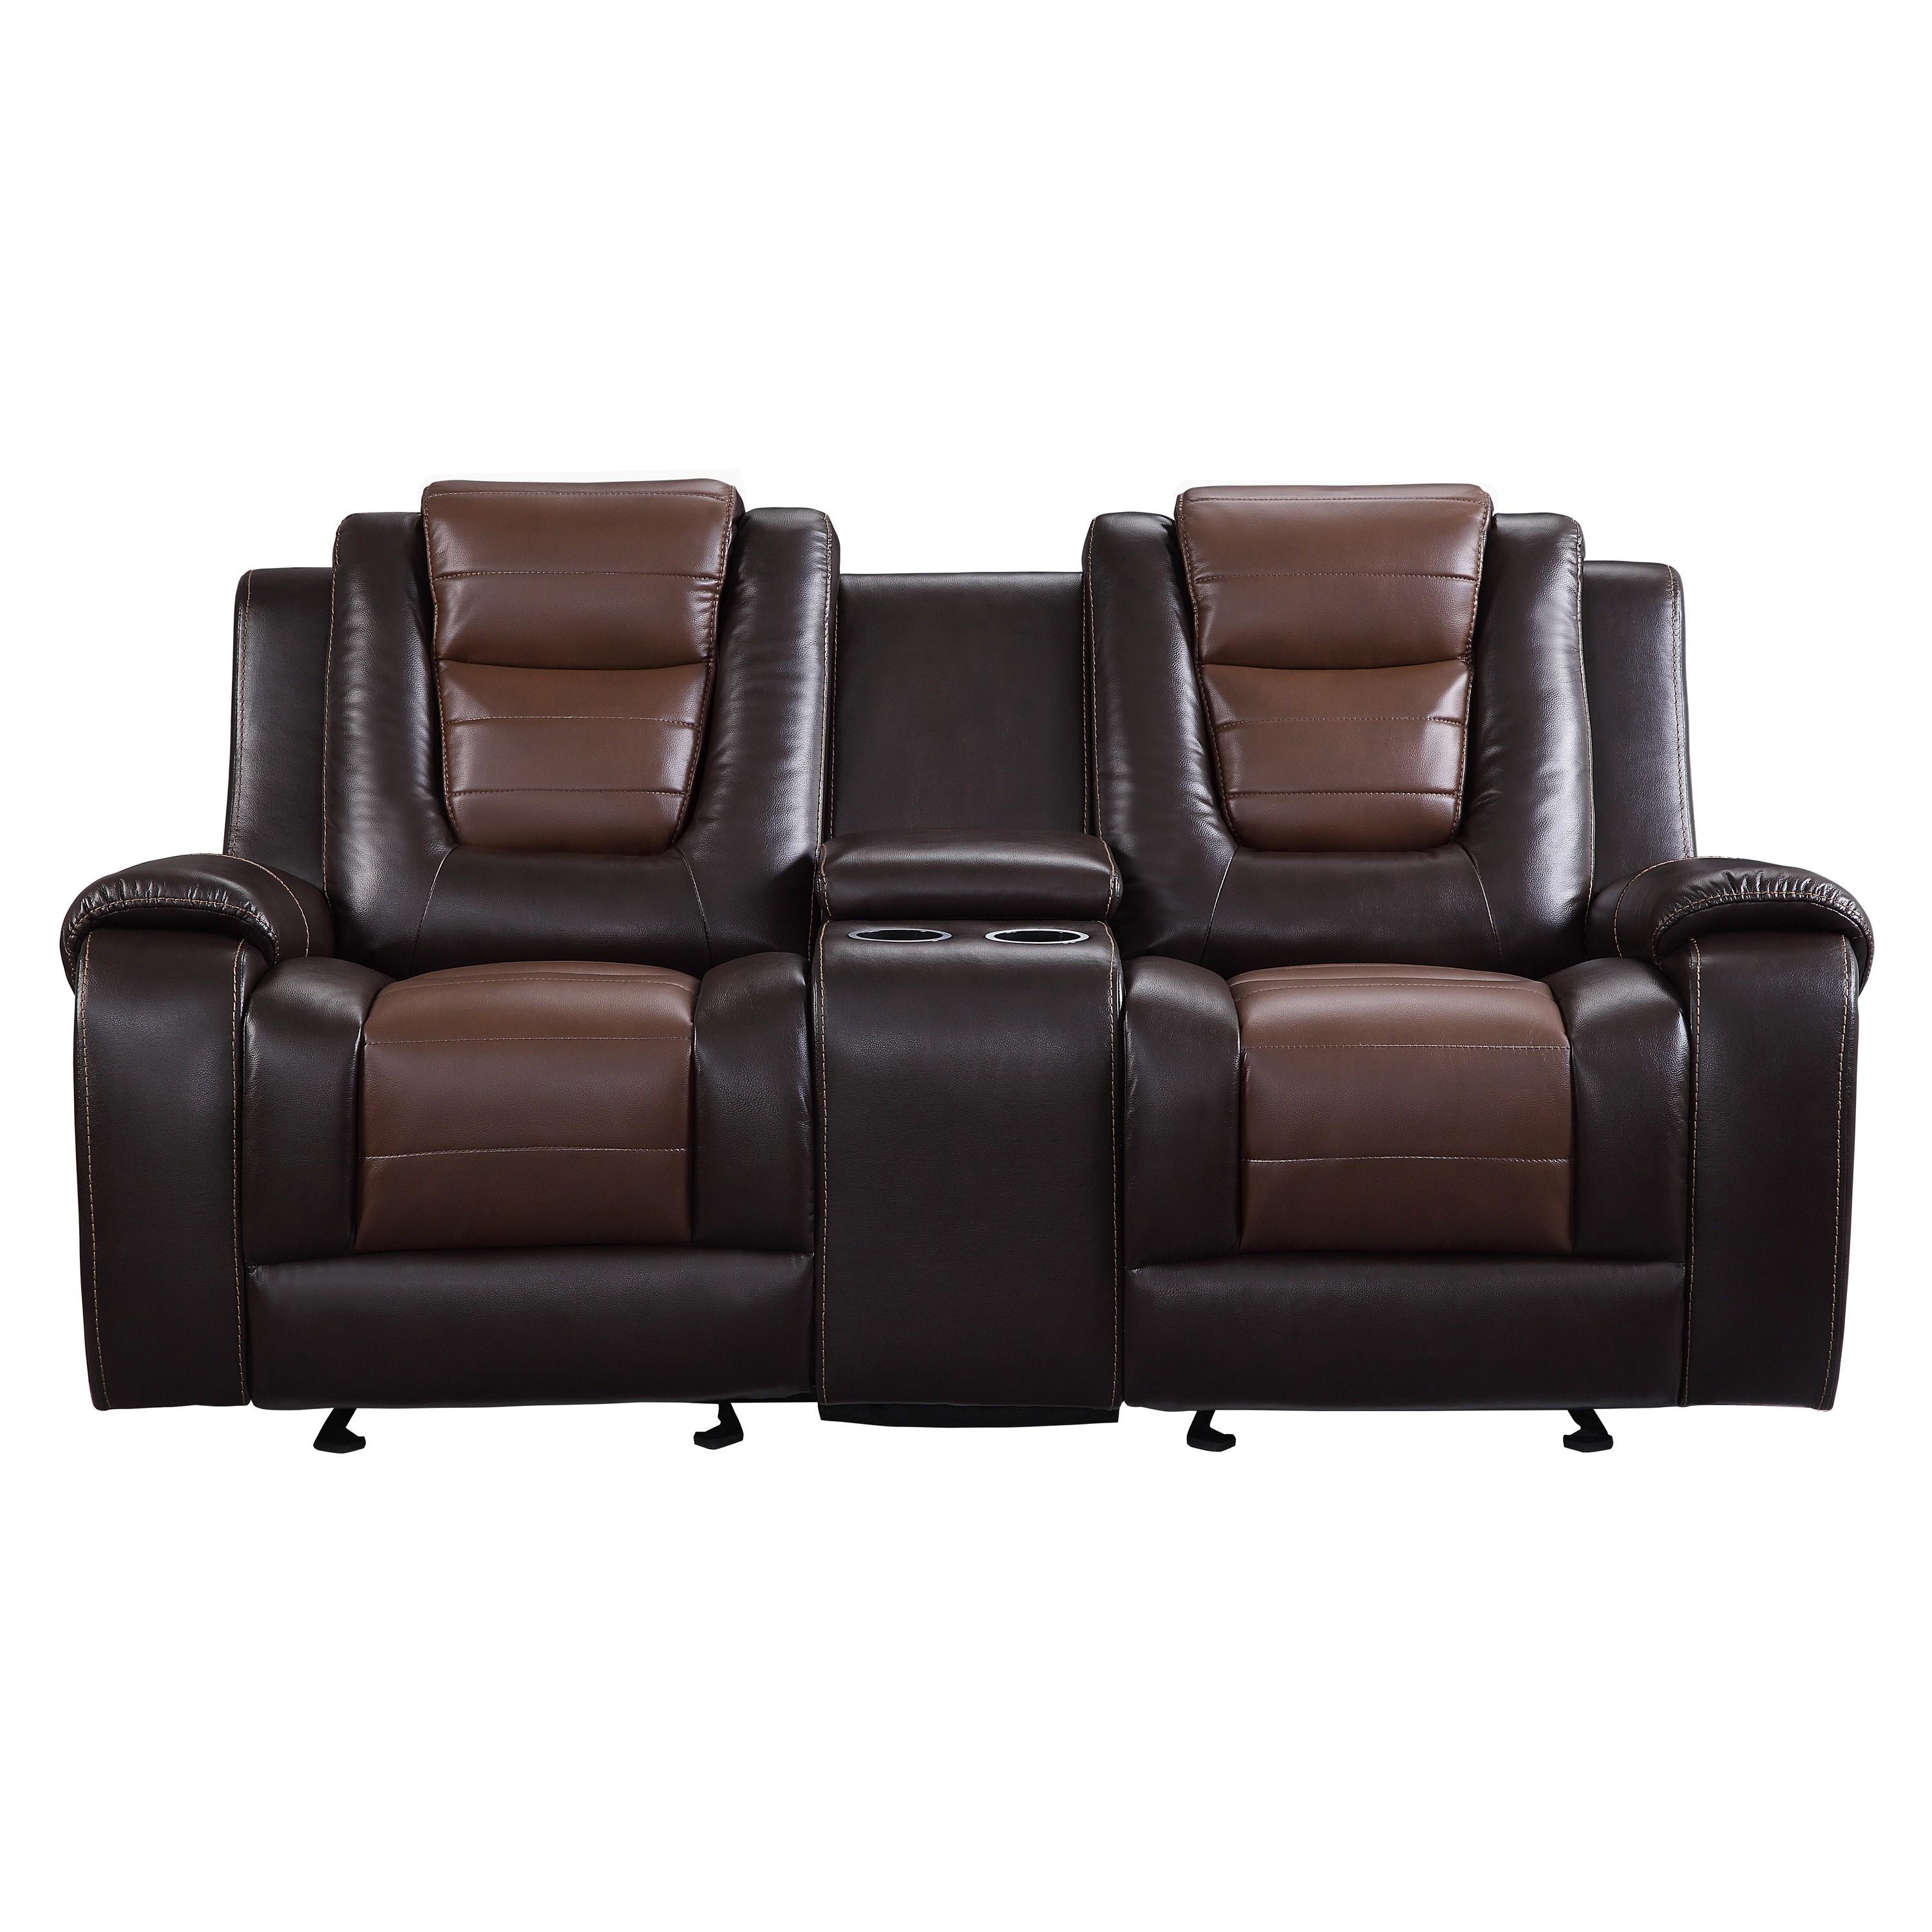 Transitional Reclining Loveseat 9470BR-2 Briscoe 9470BR-2 in Light Brown, Dark Brown Faux Leather